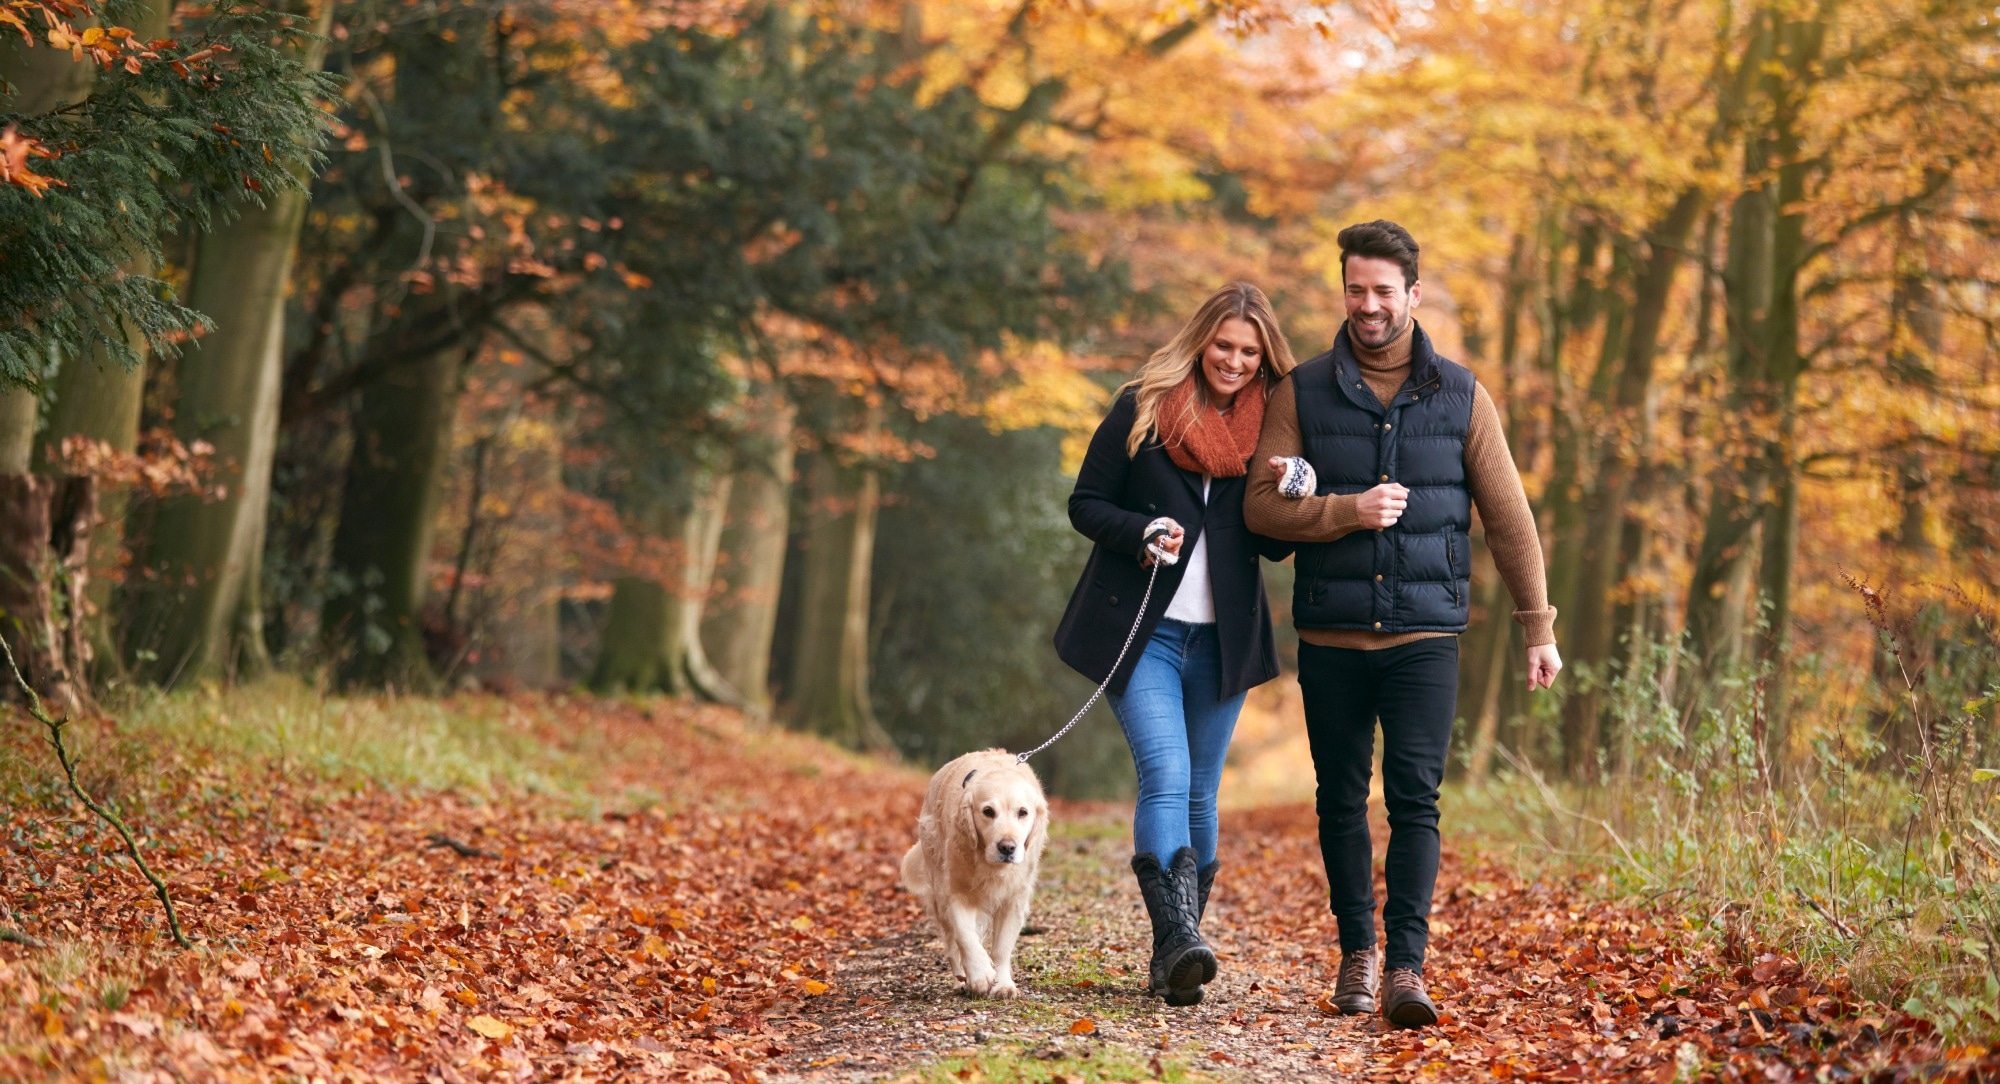 Study: Walk or be walked by the dog? The attachment role. Image Credit: Monkey Business Images/Shutterstock.com